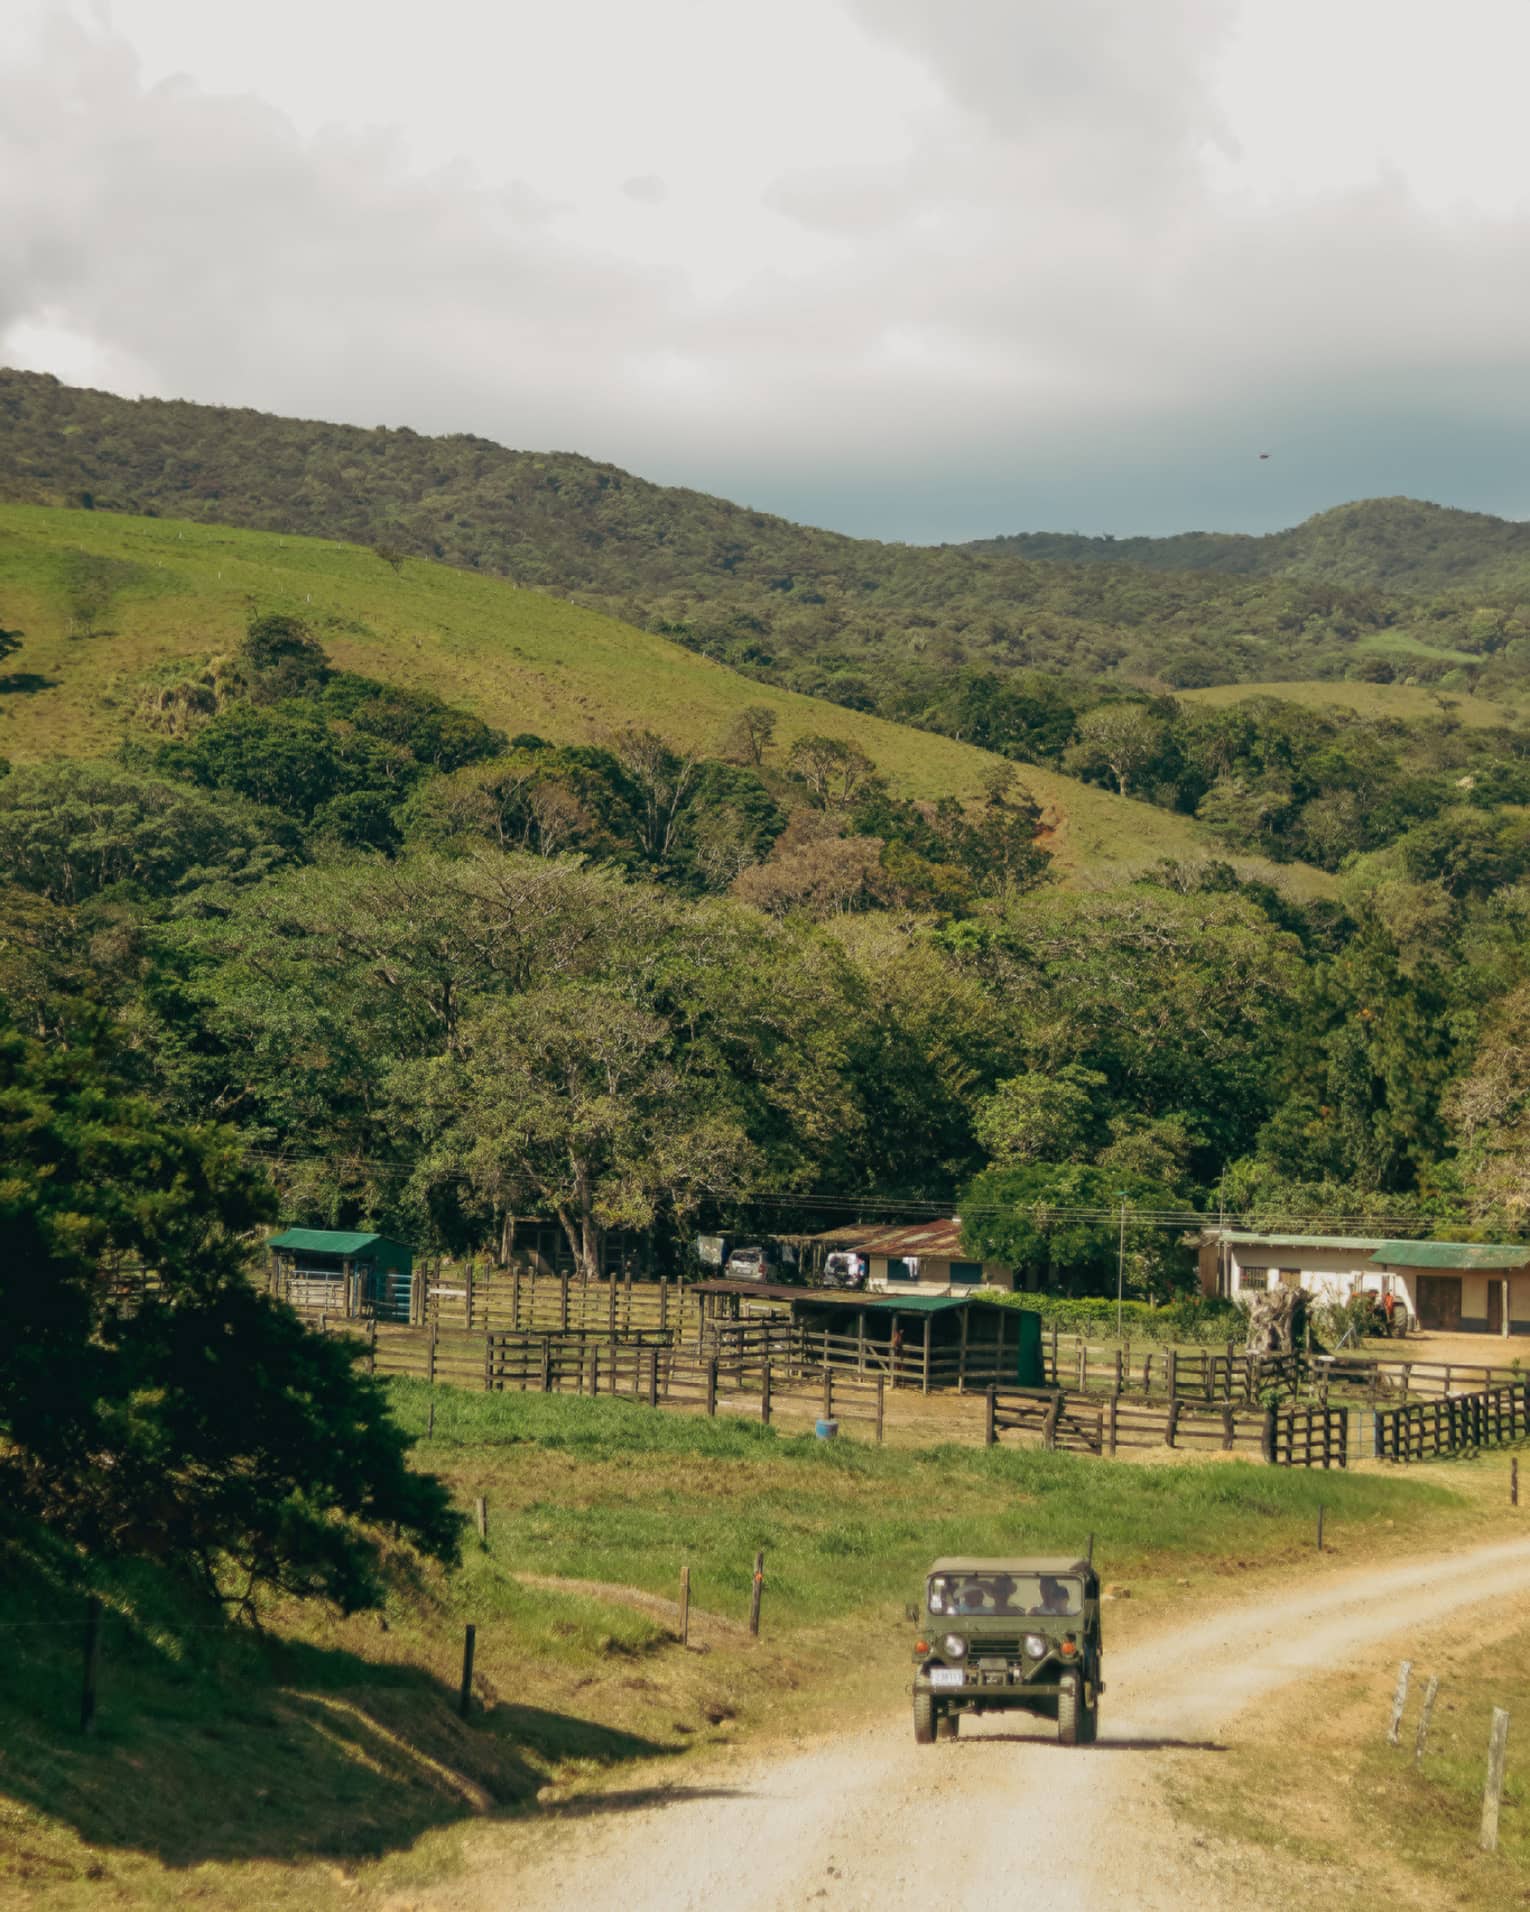 A vintage-style jeep rides along a dirt road, passing by a small farm in the hilly Costa Rican countryside